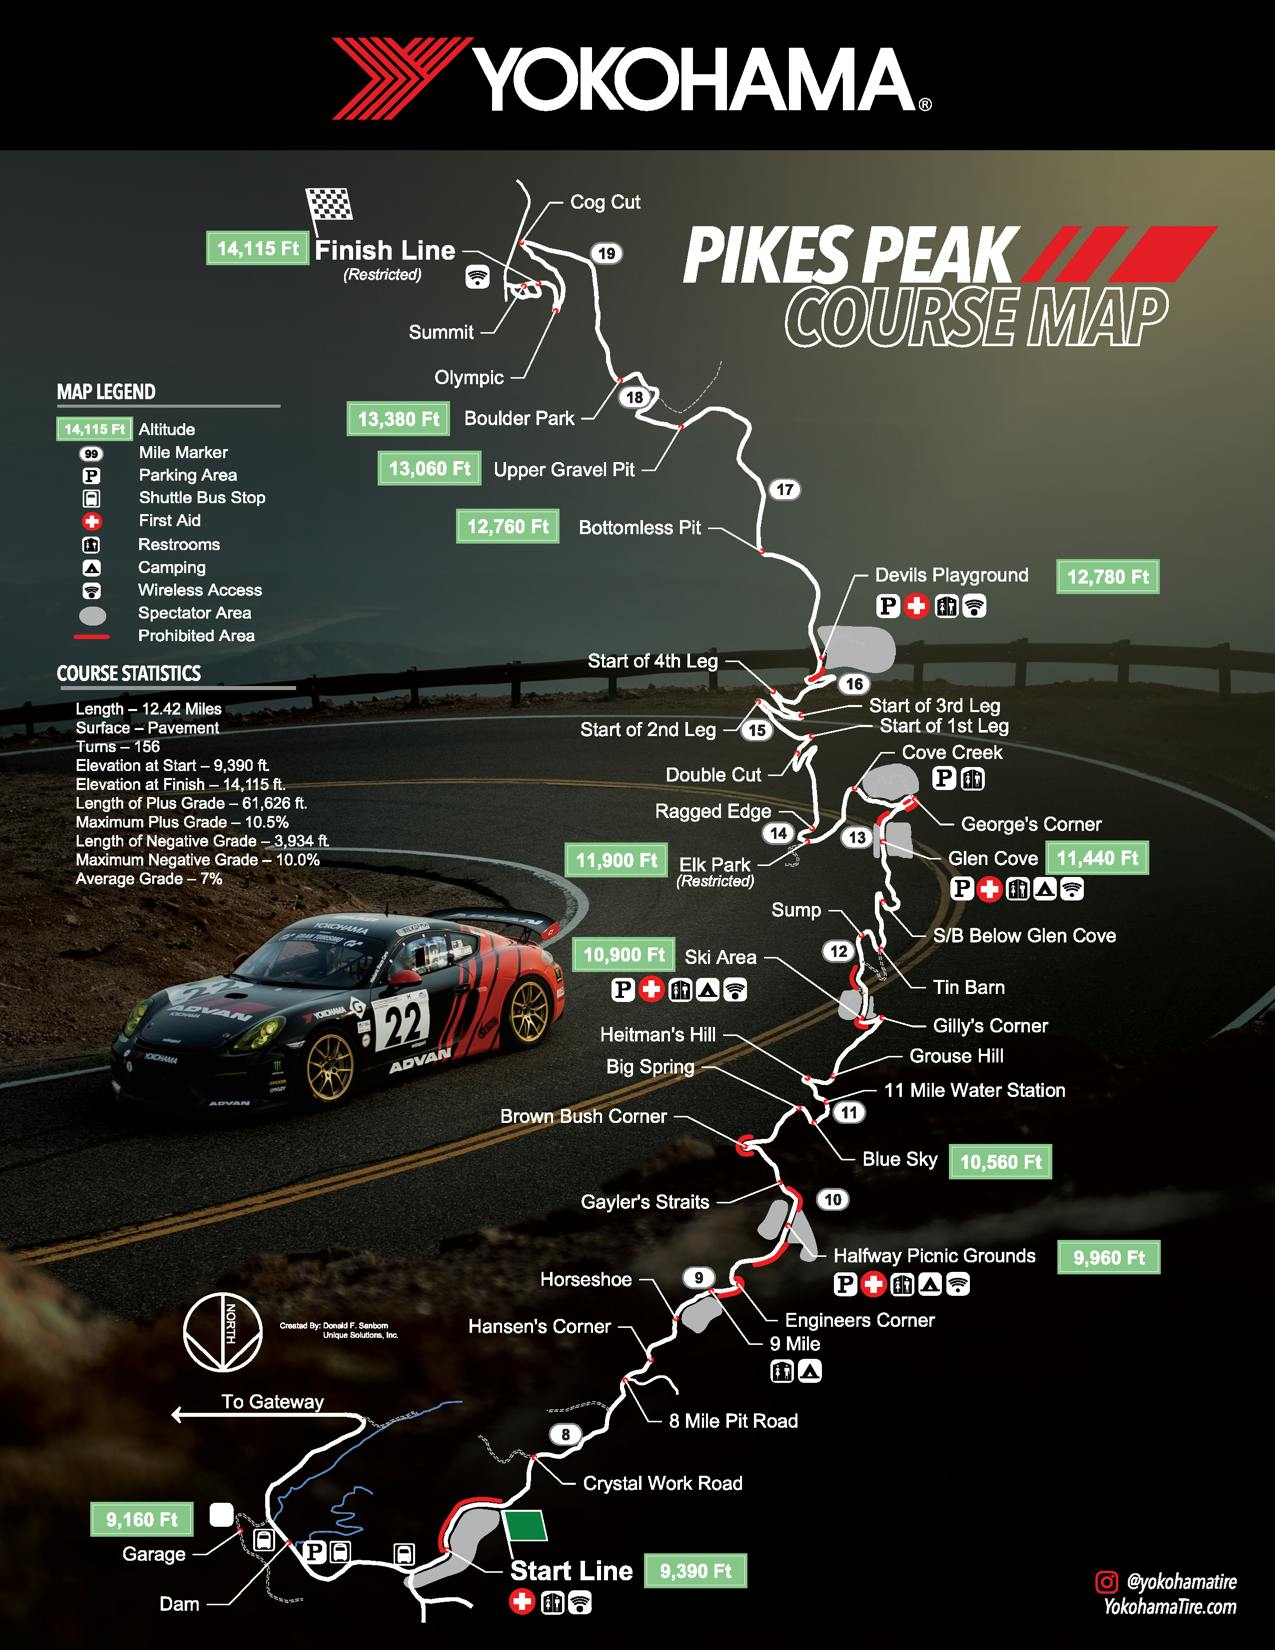 Pikes Peak course map